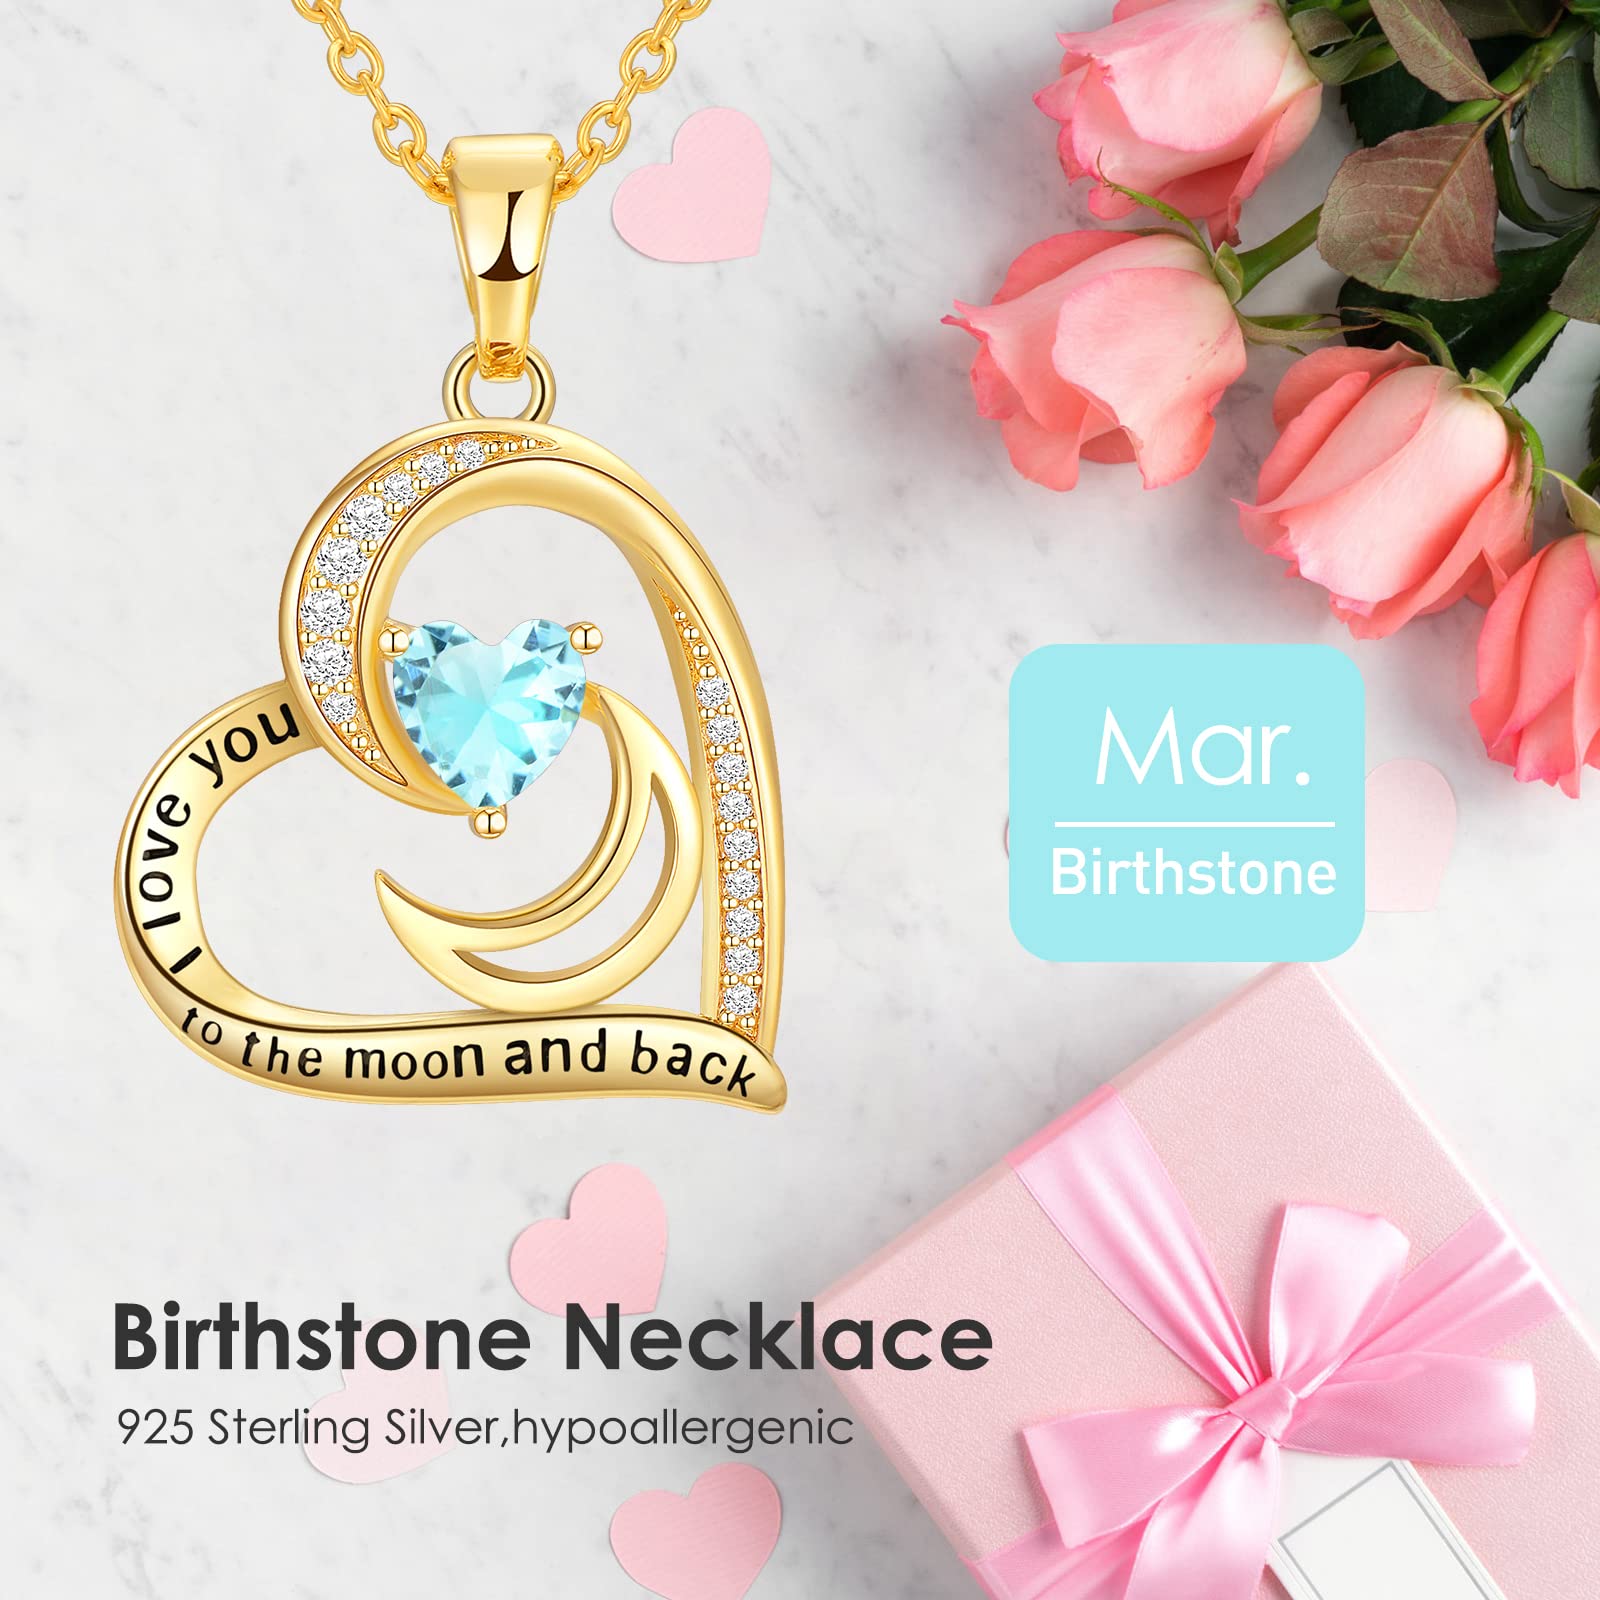 DFUNH Birthstone Necklace for Women Girls, I Love You to The Moon and Back Heart Necklace Jewelry Gifts for Women Mom Daughter Mothers Day Gifts Birthday Gifts Valentines Day Gifts for Her Mother Wife Girlfriend